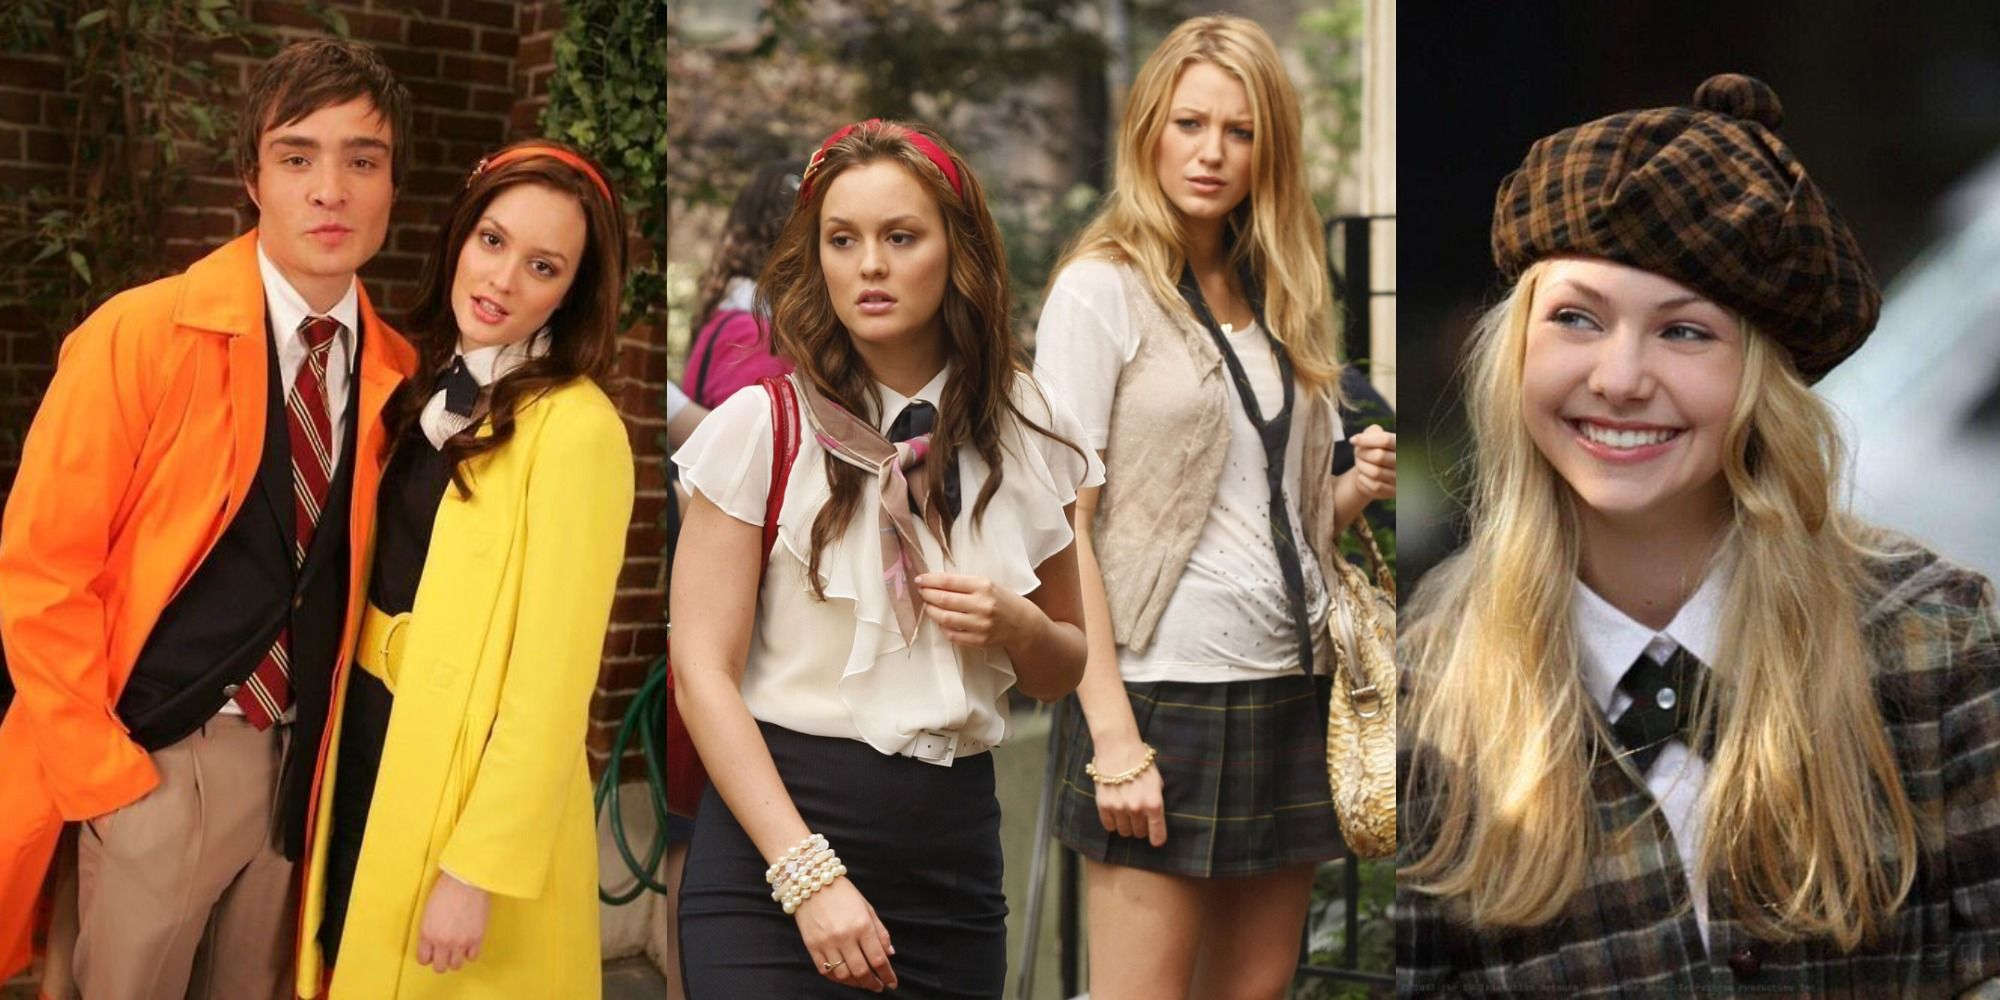 Split image of Chuck and Blair posing, with Serena looking annoyed with Blair, and a laughing Jenny in Gossip Girl.